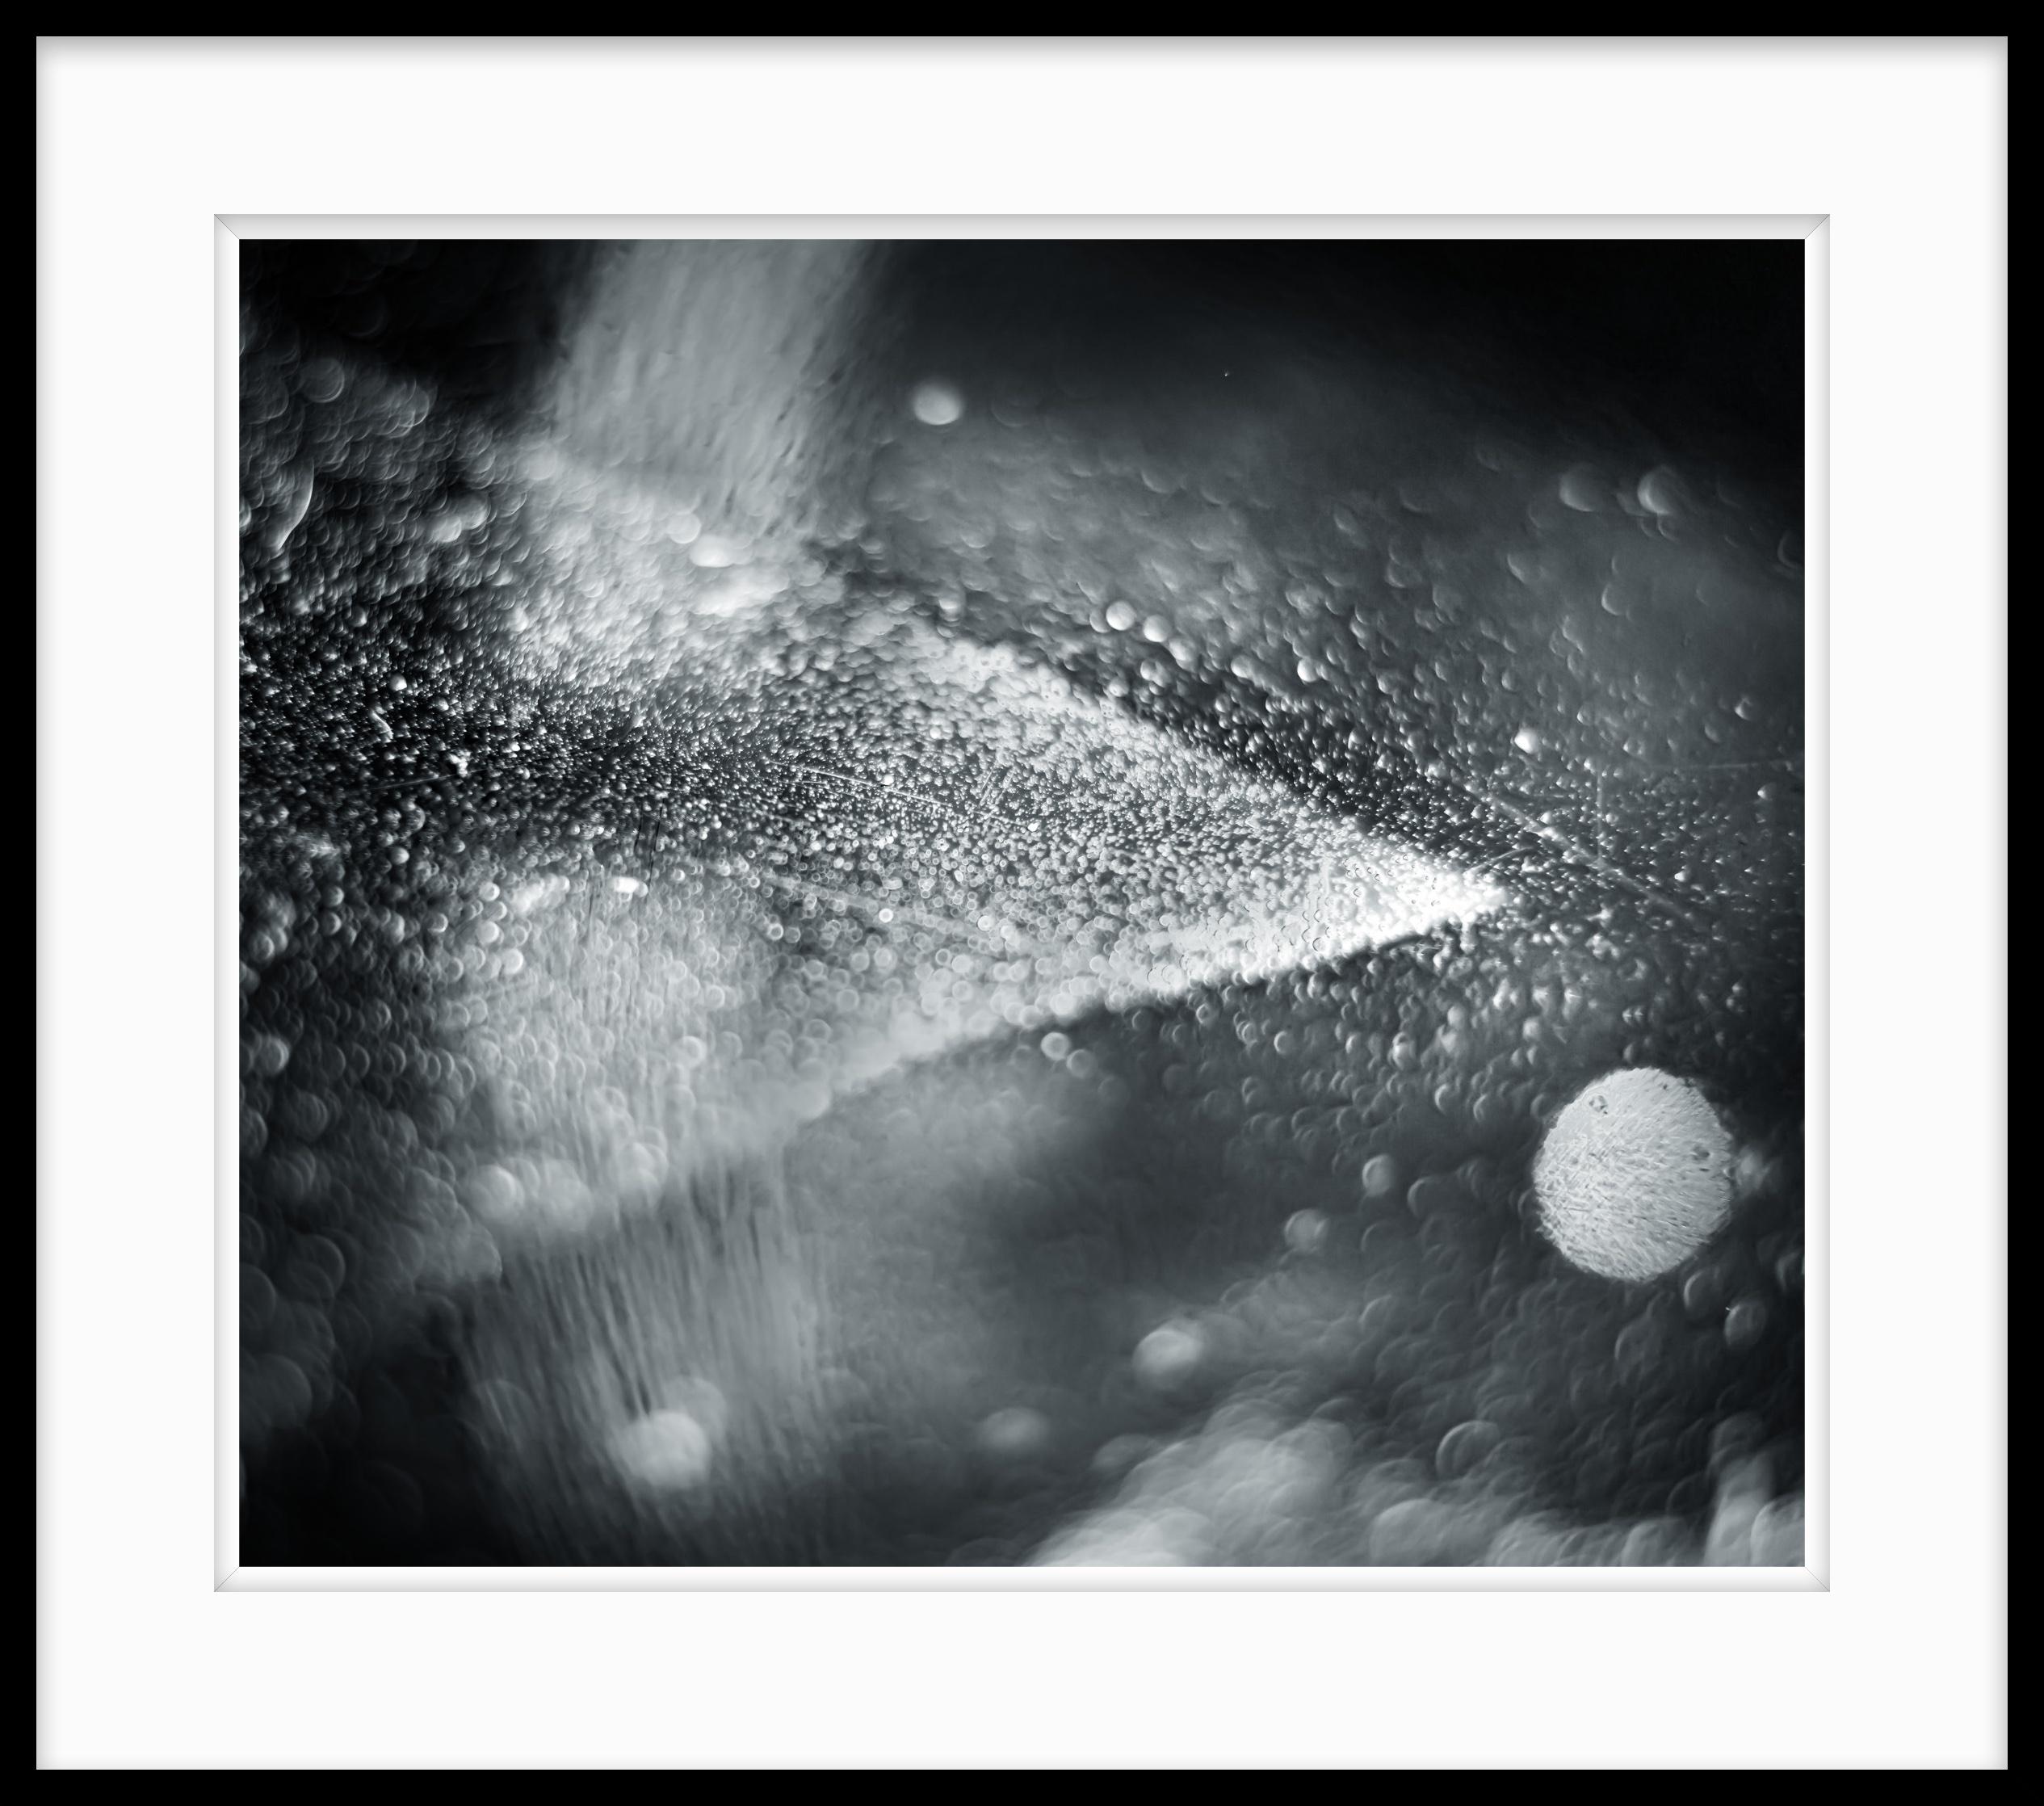 This is Untitled #47 from the Nature of Particles series.

The Nature of Particles series consists of abstract photographs of ordinary particulates, that we observe in our everyday surroundings as floating fragments seen in shafts of light.

My